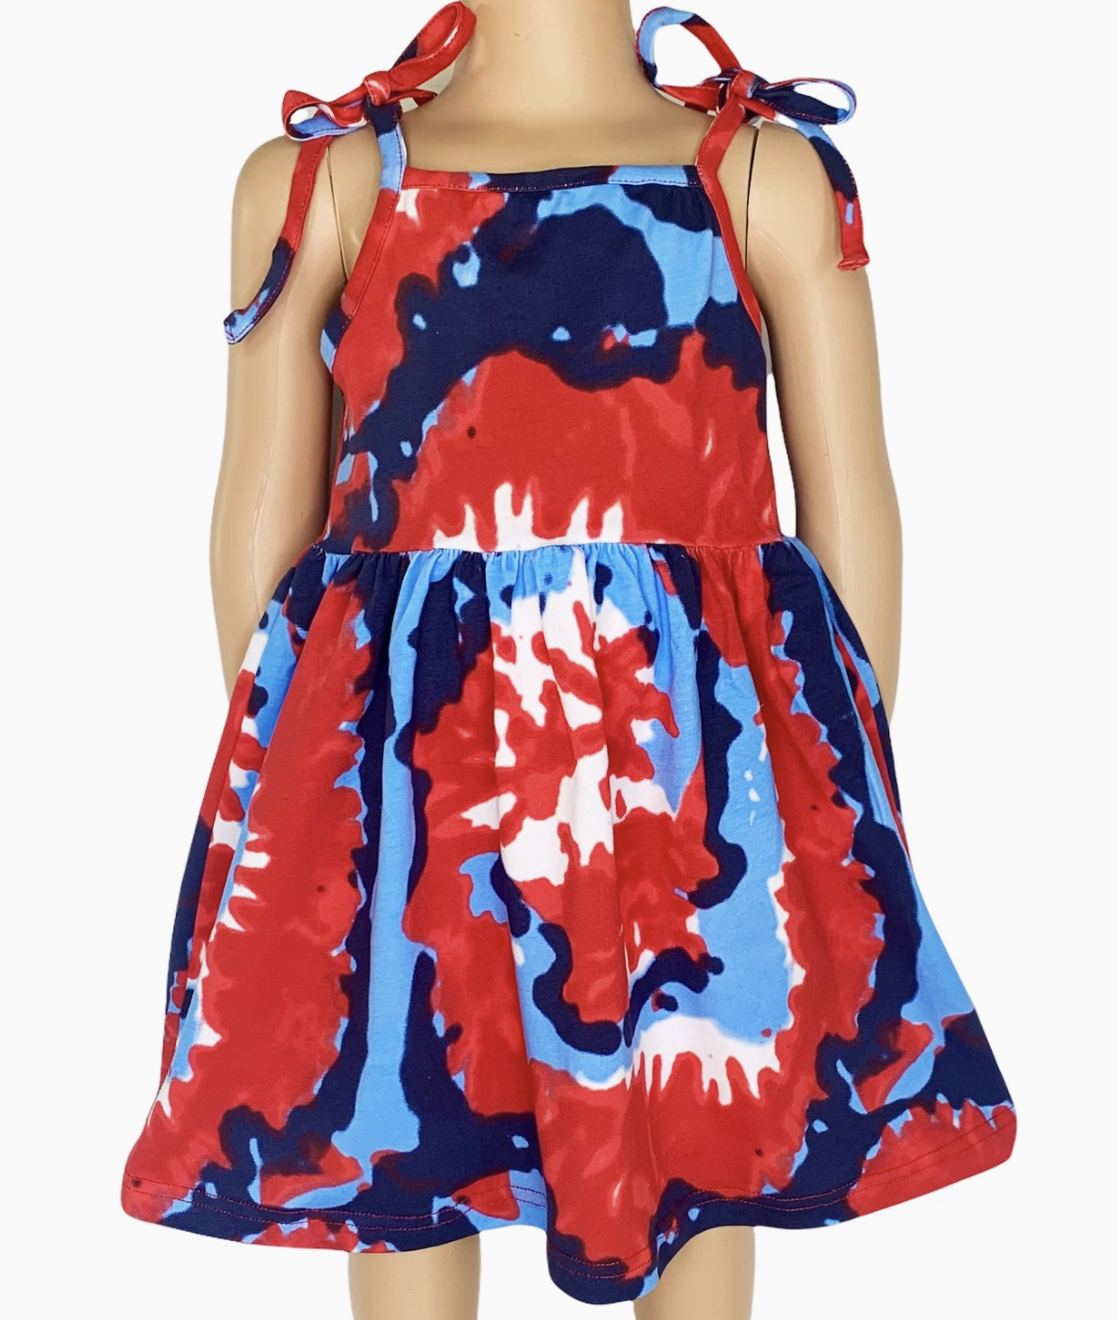 Black Swamp Boots and Apparel Red, White, Blue Tie Dye Dress